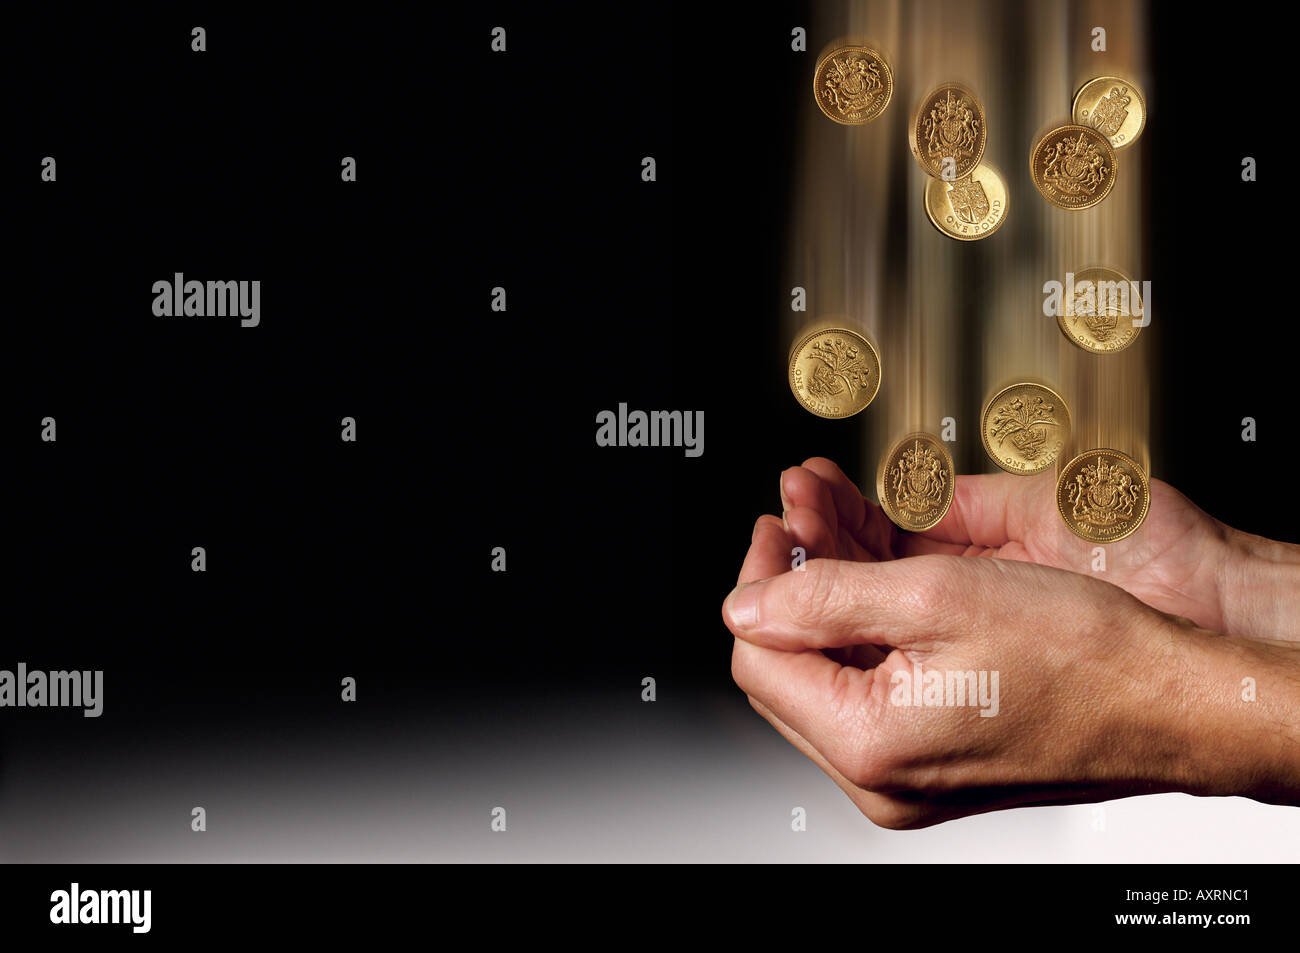 Hands catching falling Pound coins Stock Photo